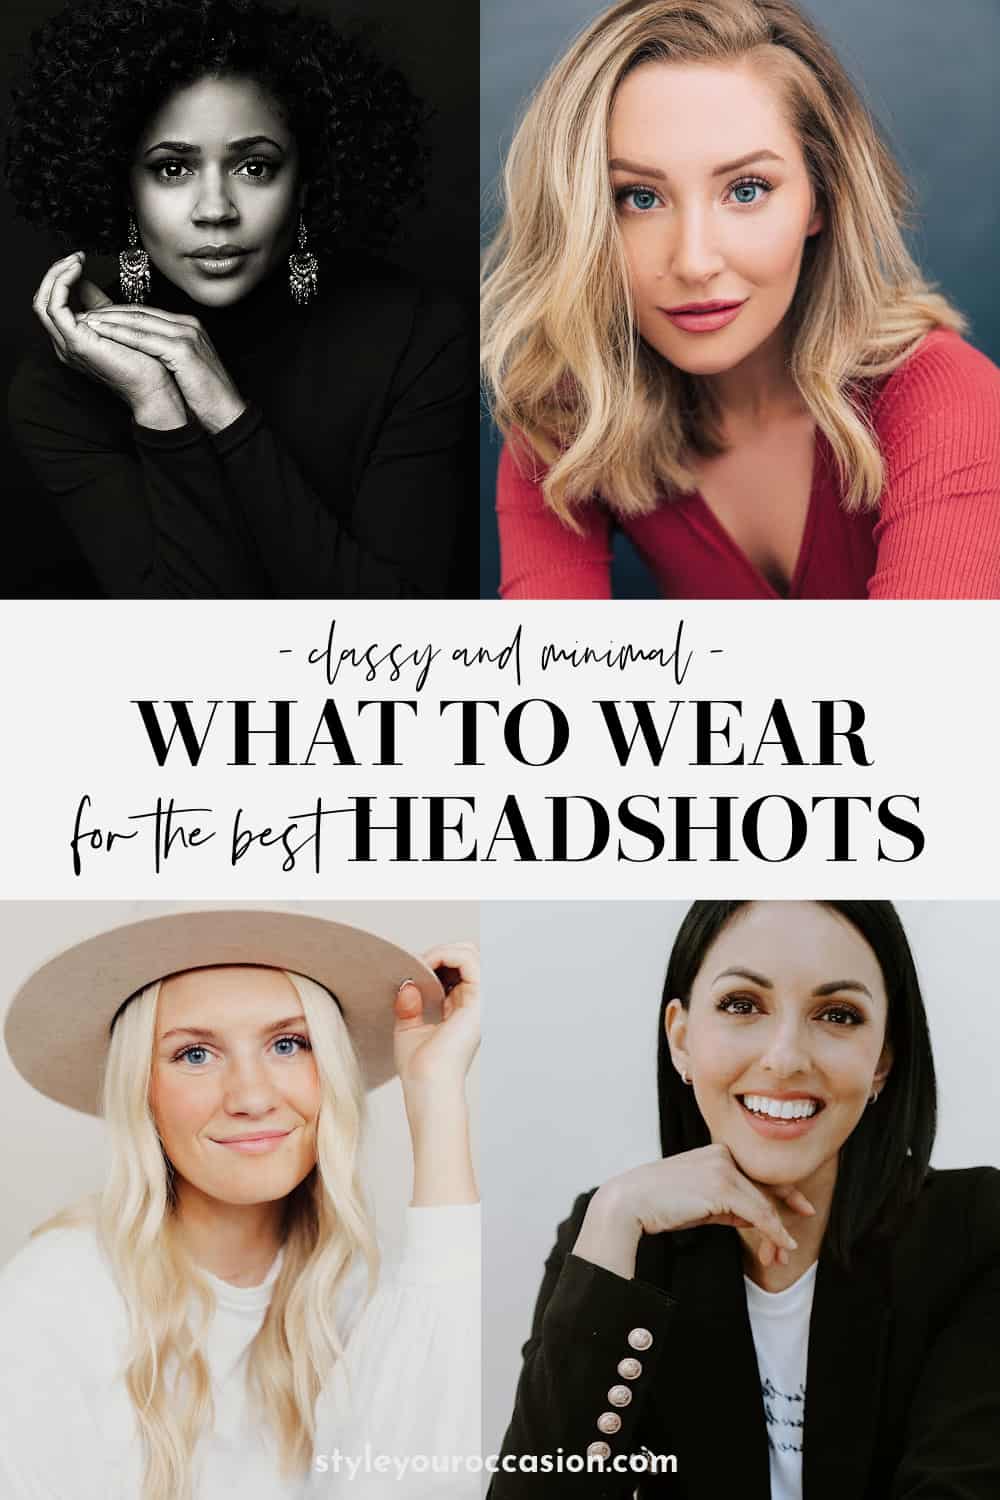 Collage of outfits to wear for headshot photos.